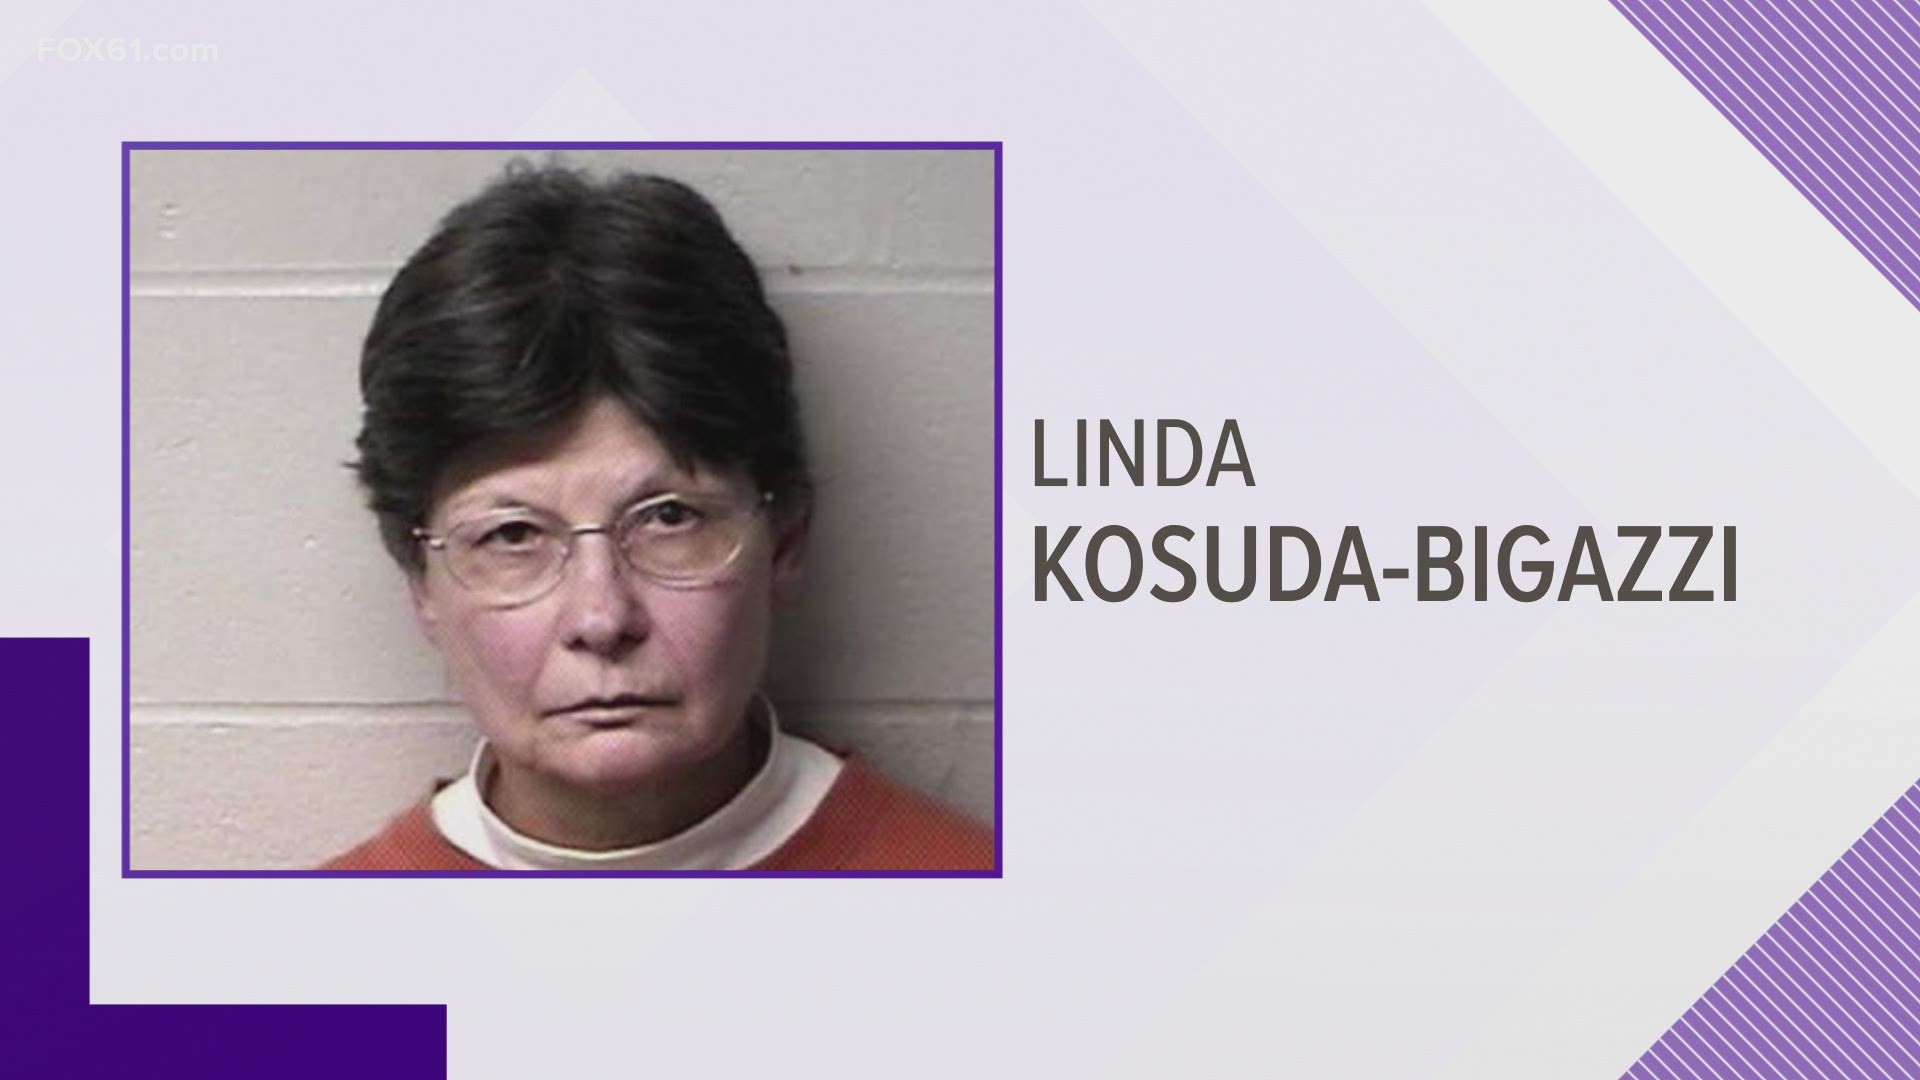 Linda Kosuda-Bigazzi was arrested after a larceny investigation that began in March. Kosuda-Bigazzi was charged with the murder of her husband in 2018.